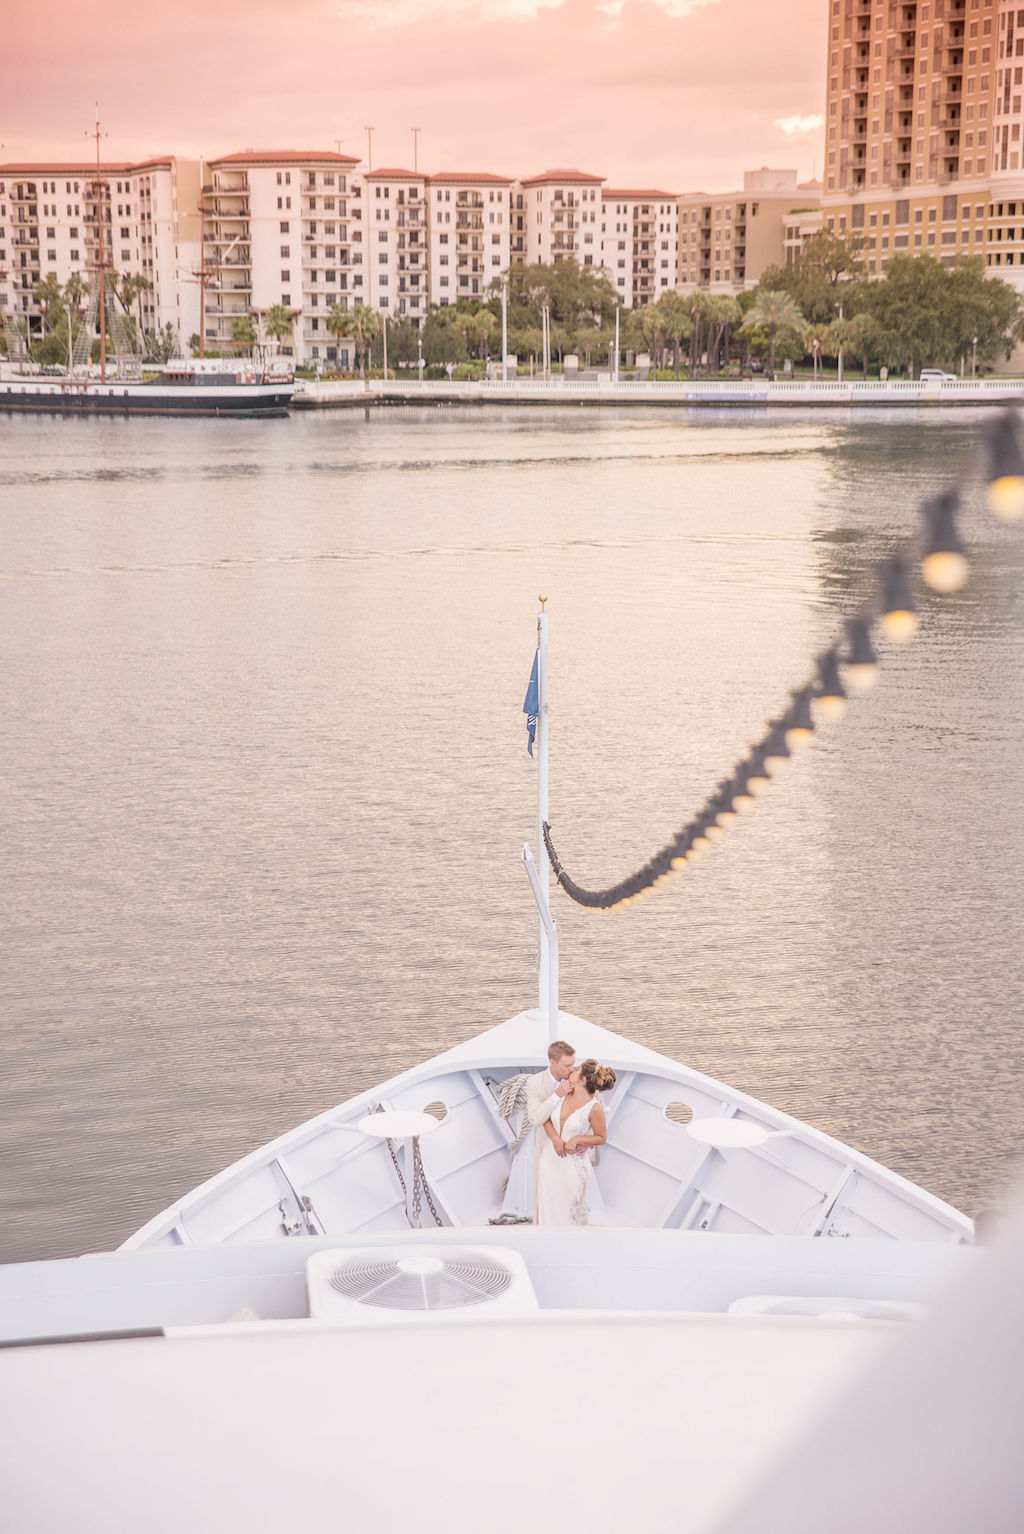 Florida Bride and Groom Sunset Wedding Portrait on Deck of Tampa Waterfront Venue Yacht Starship II | Tampa Bay Wedding Photographer Kristen Marie Photography